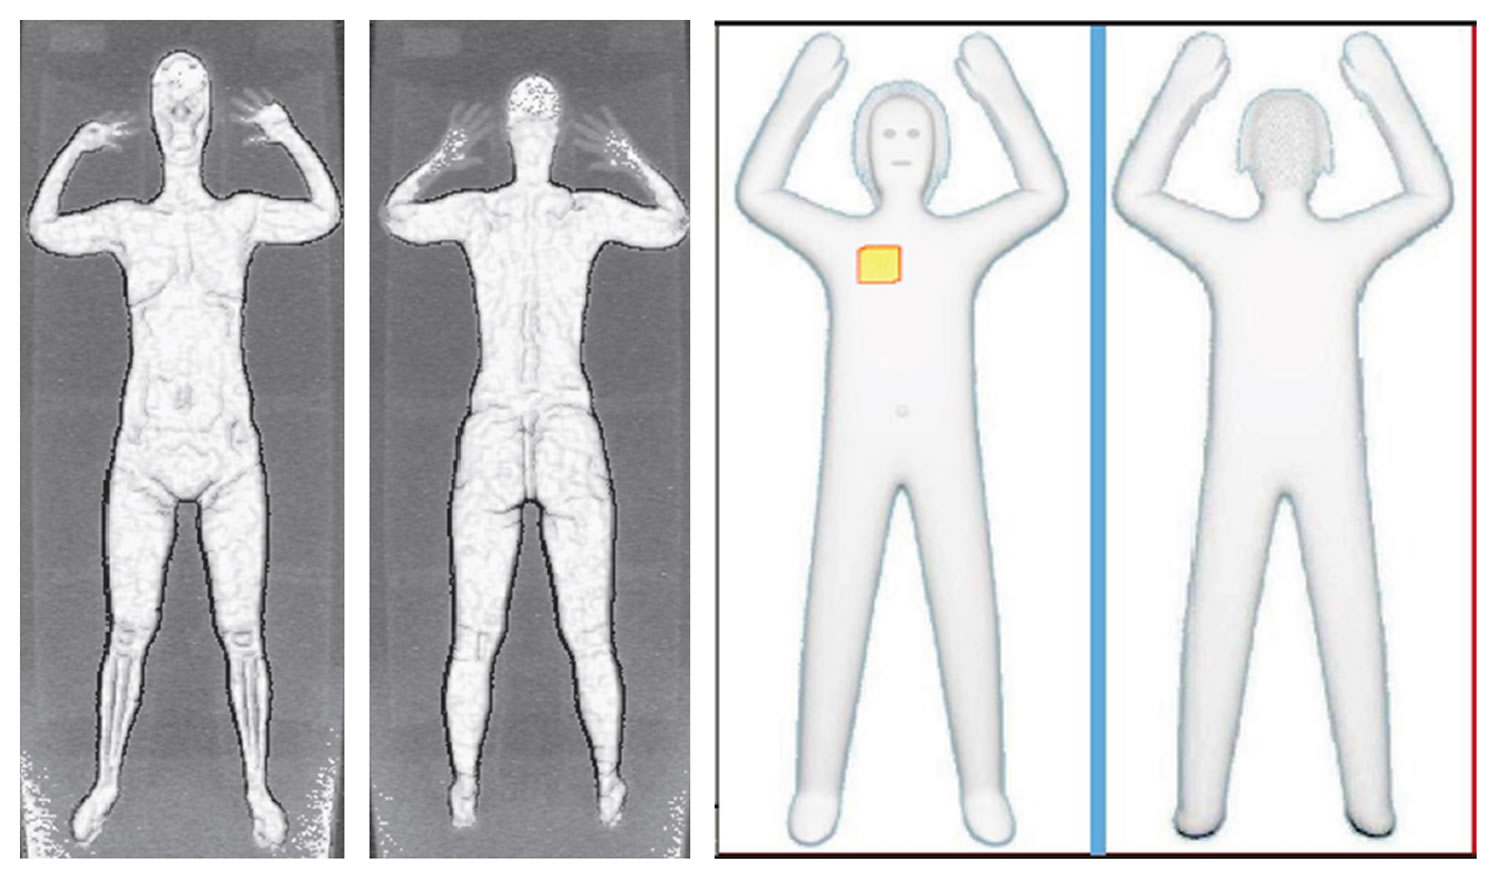 Transportation Security Administration
At left are two images using backscatter advanced image X-ray technology. At right are images from new scanners using new millimeter-wave technology that produces a cartoonlike outline rather than naked images of passengers produced by using X-rays.